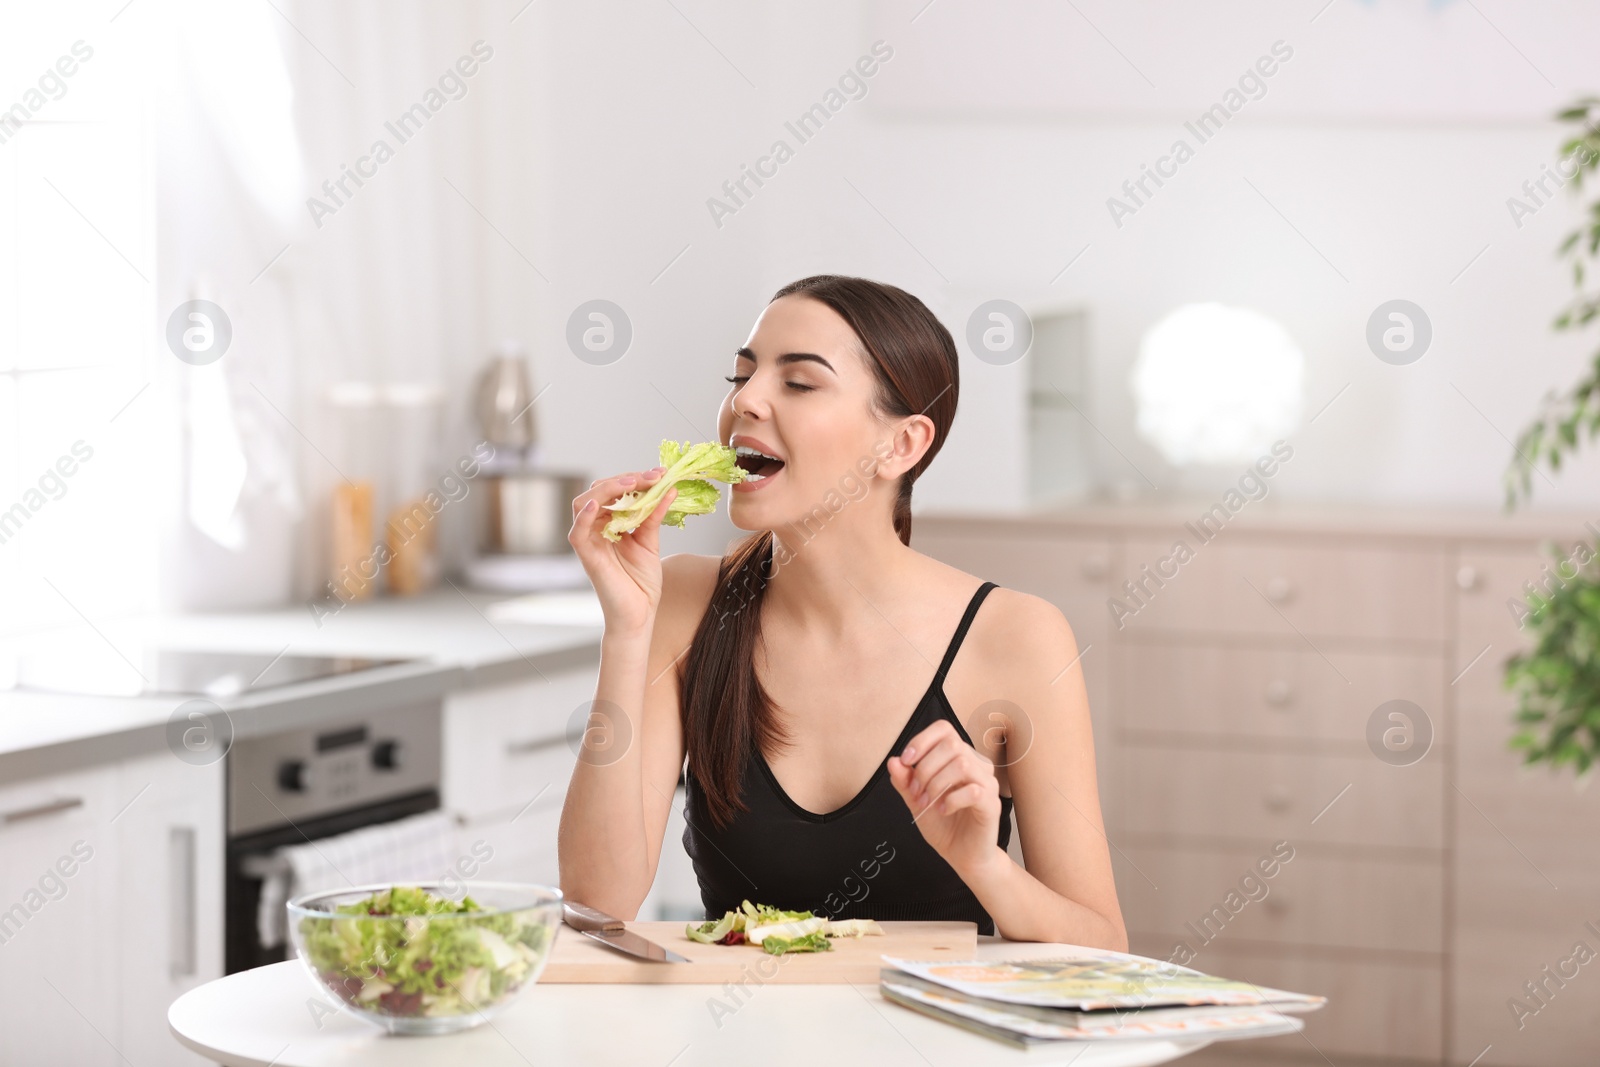 Photo of Young woman in fitness clothes eating lettuce while preparing healthy breakfast at home